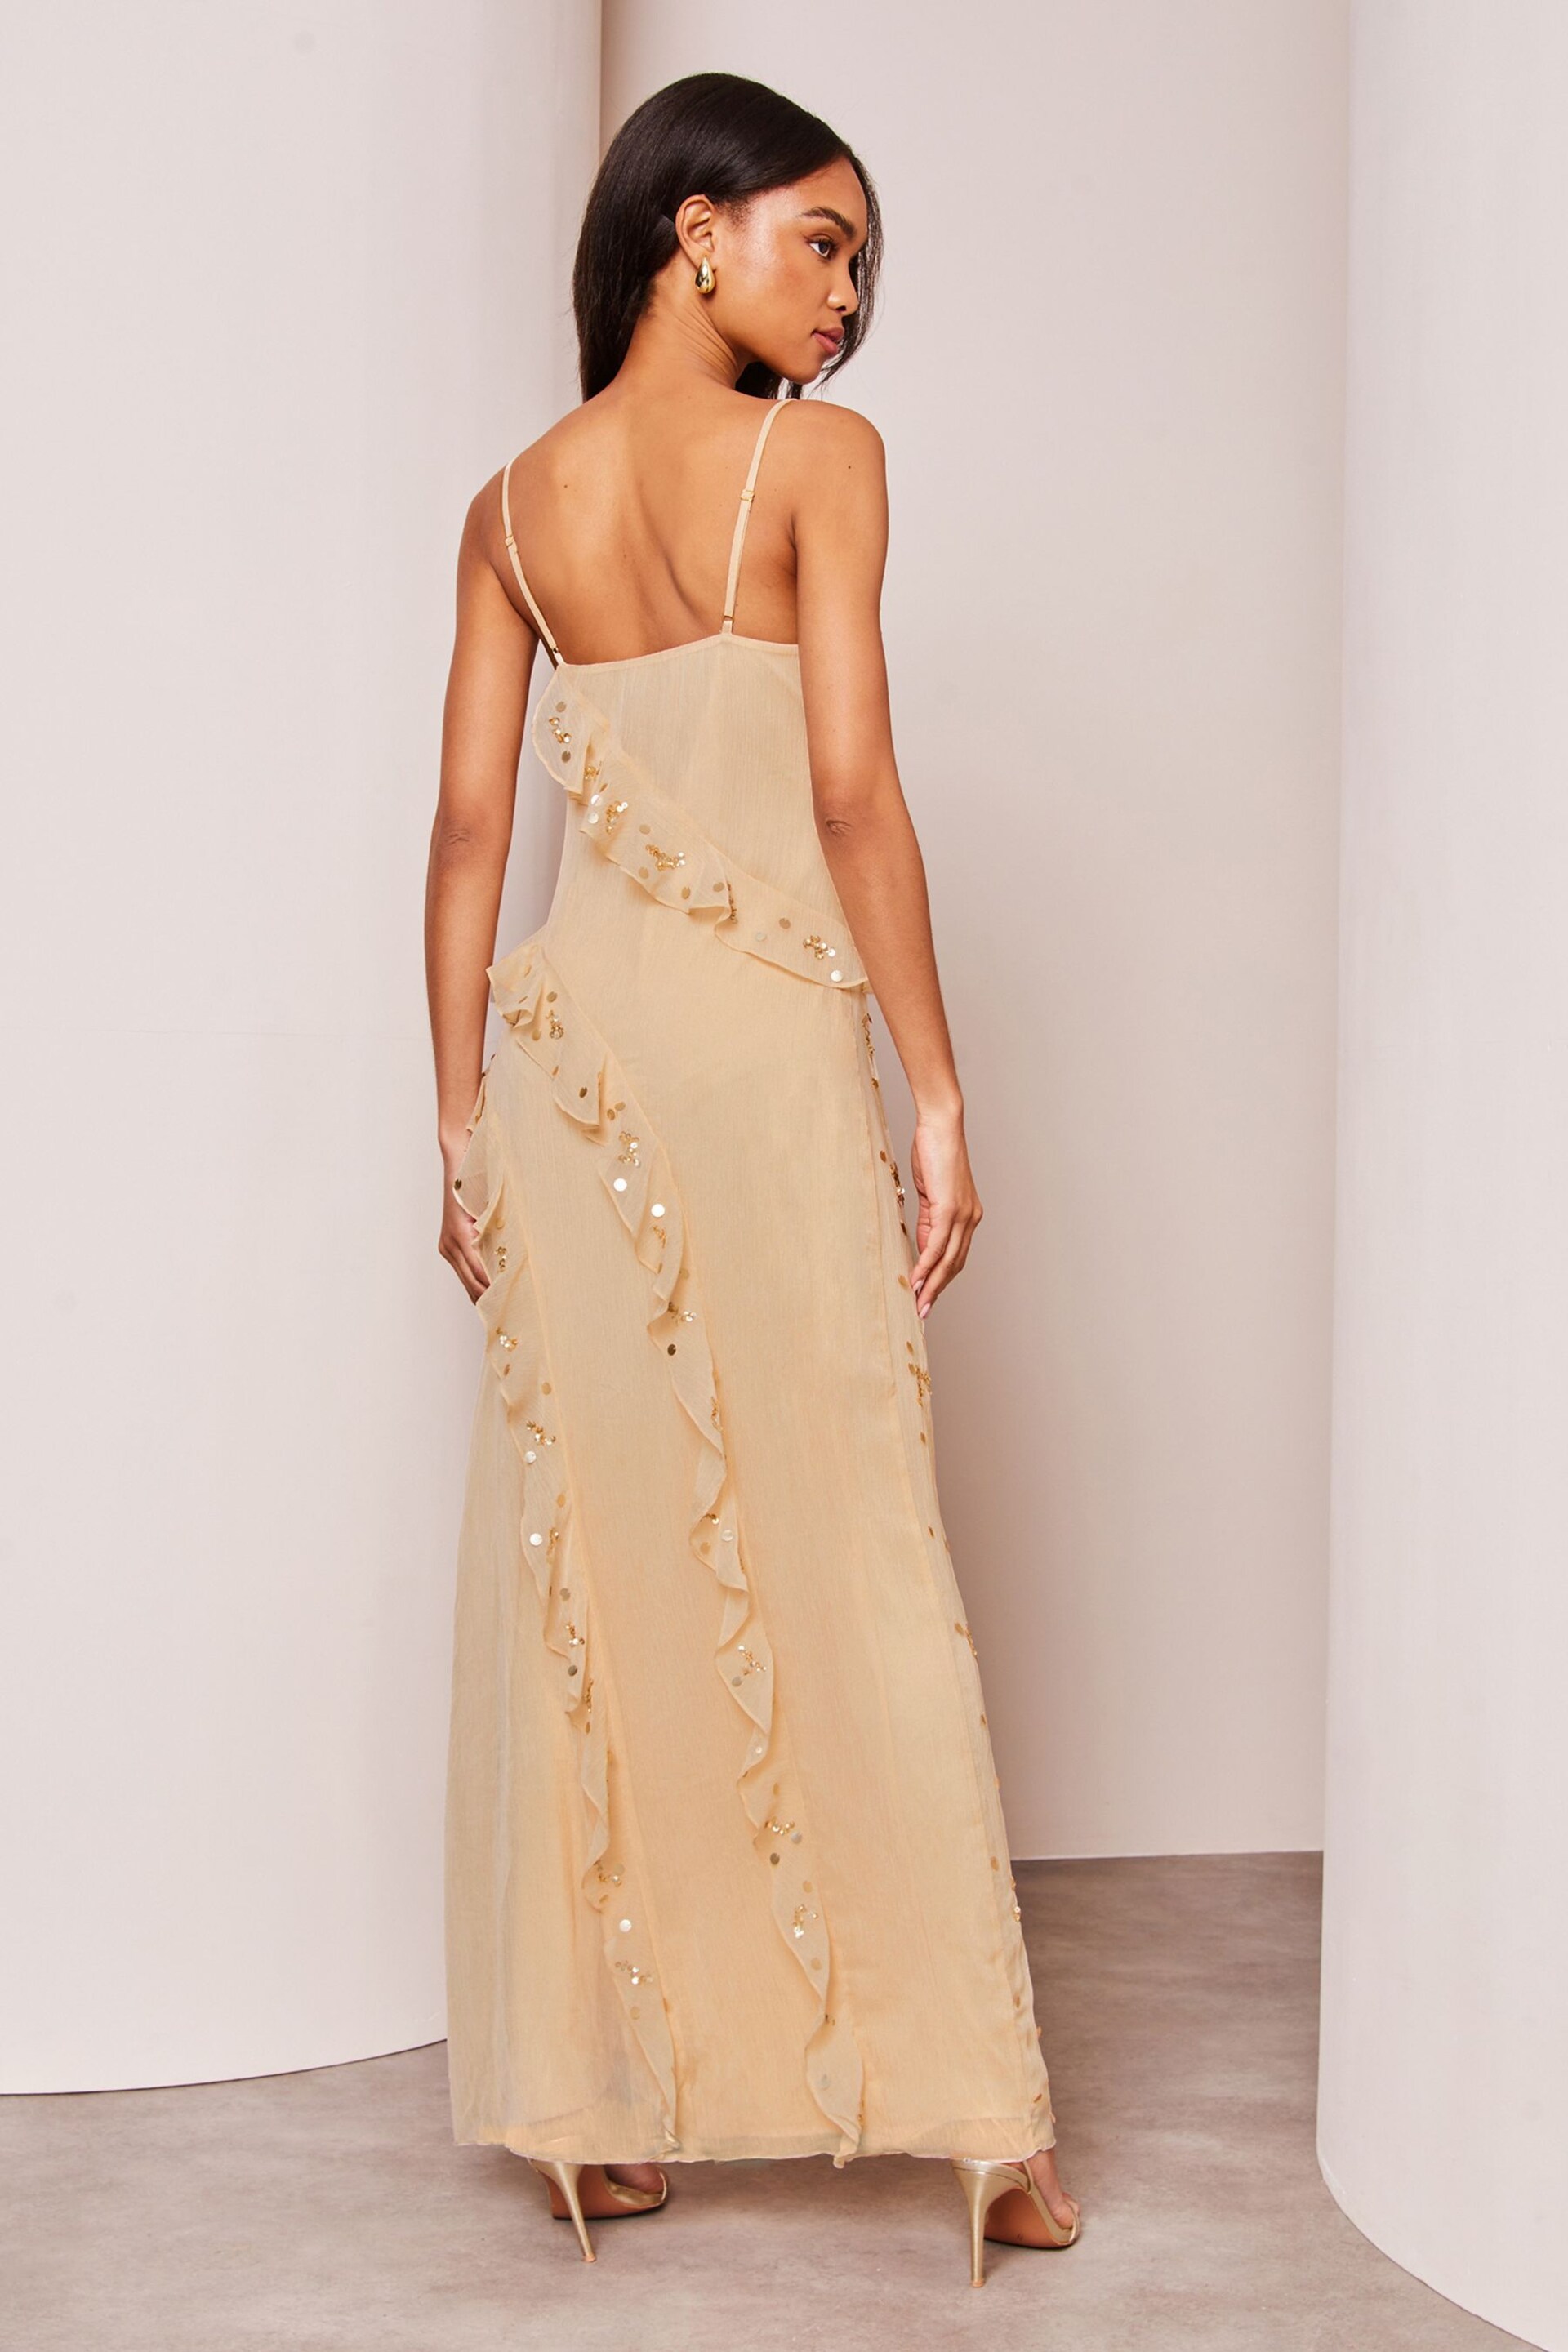 Lipsy Champagne Gold Sequin Ruffle Cami Summer Maxi Dress - Image 2 of 4